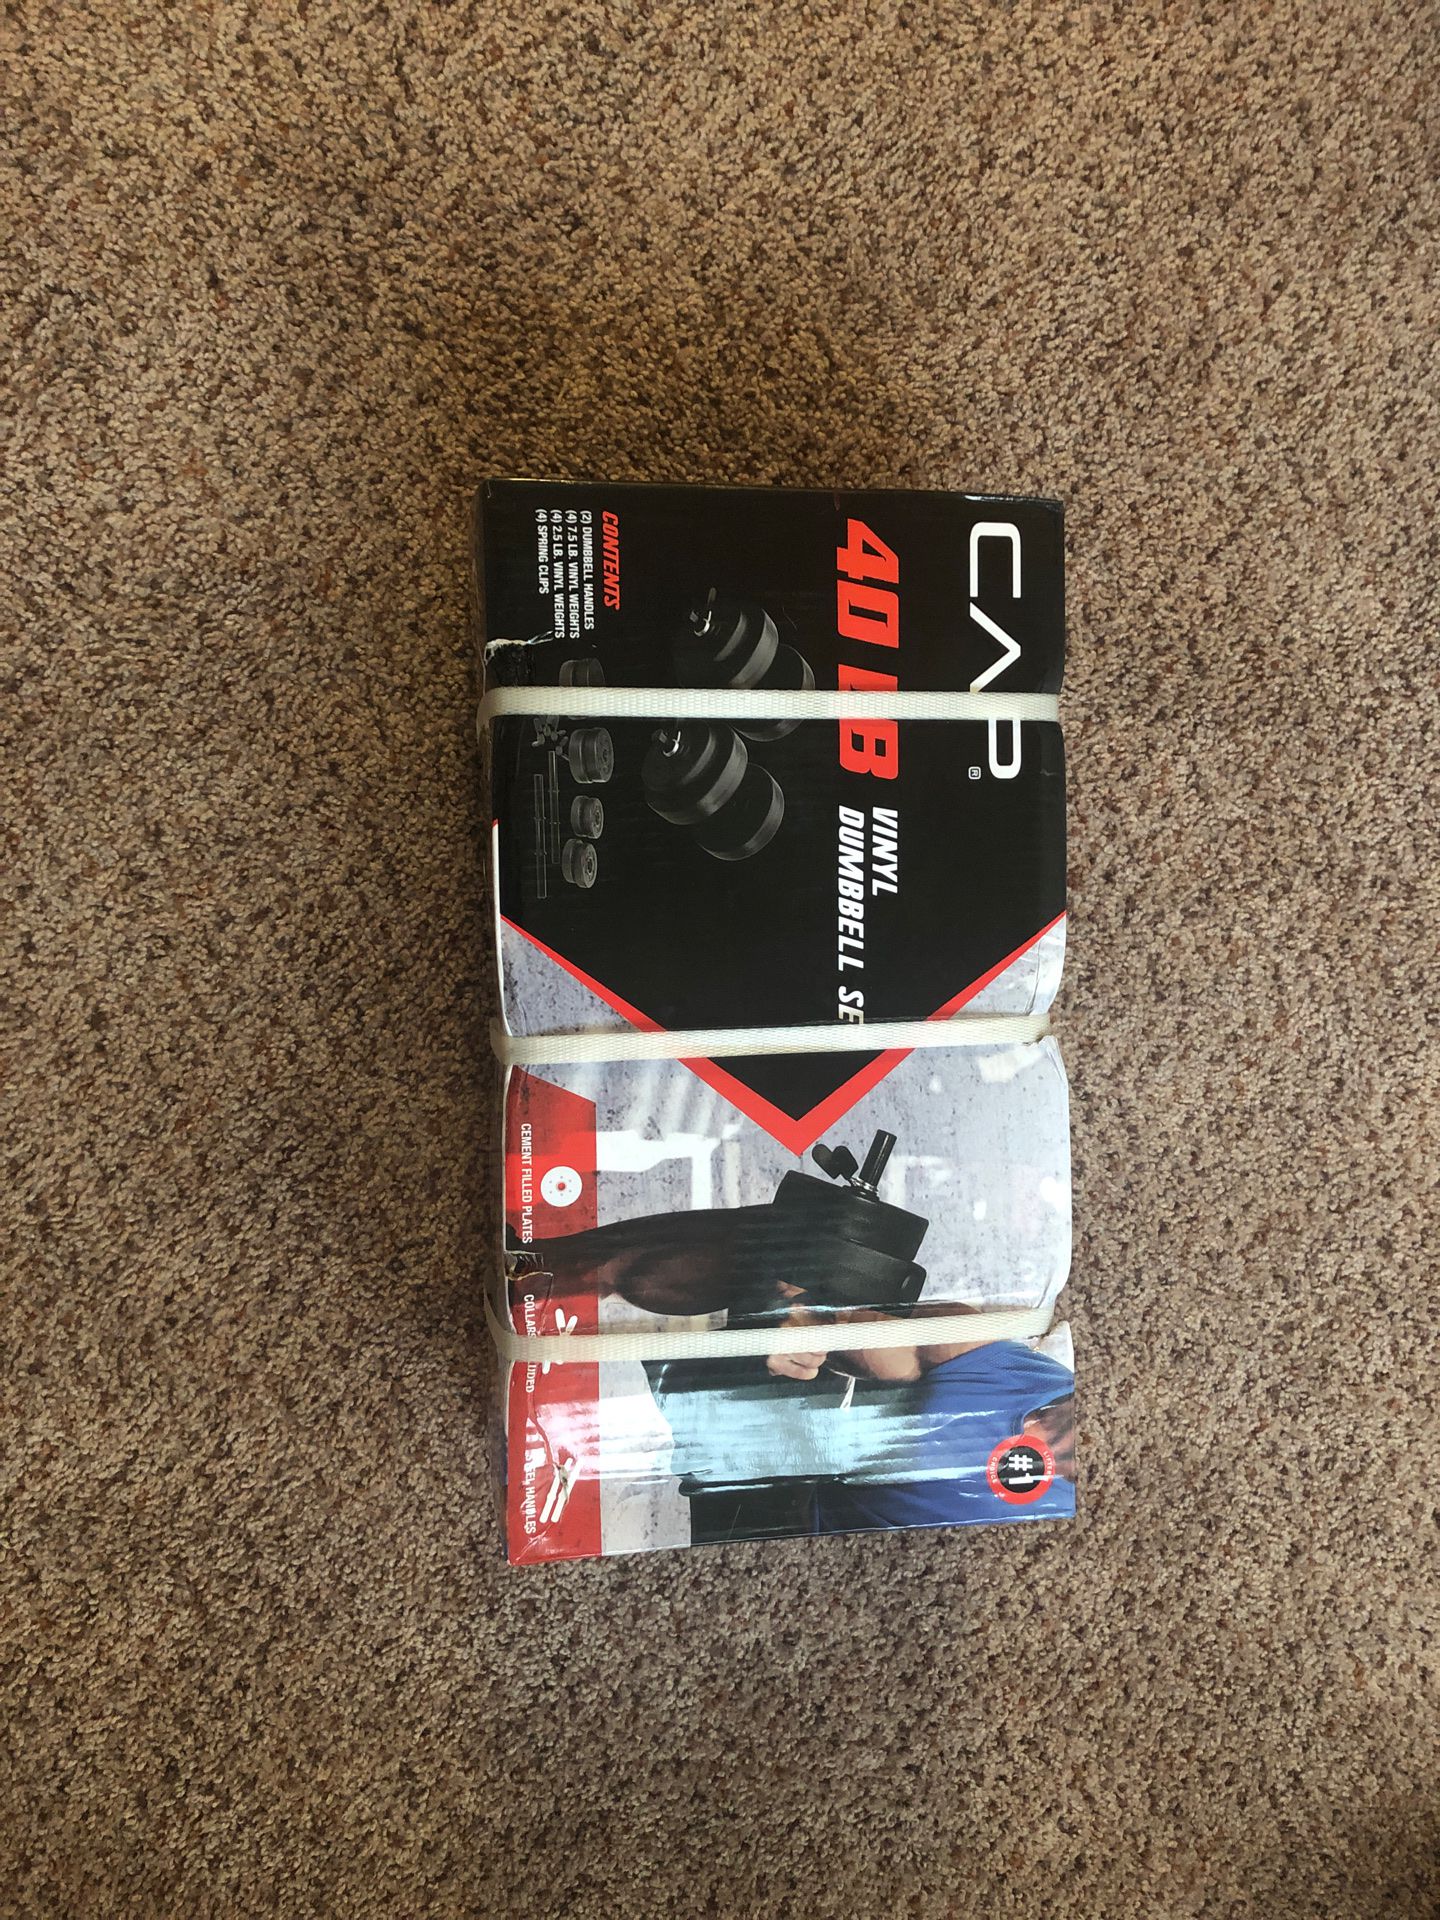 40lbs dumbbell brand new set in box